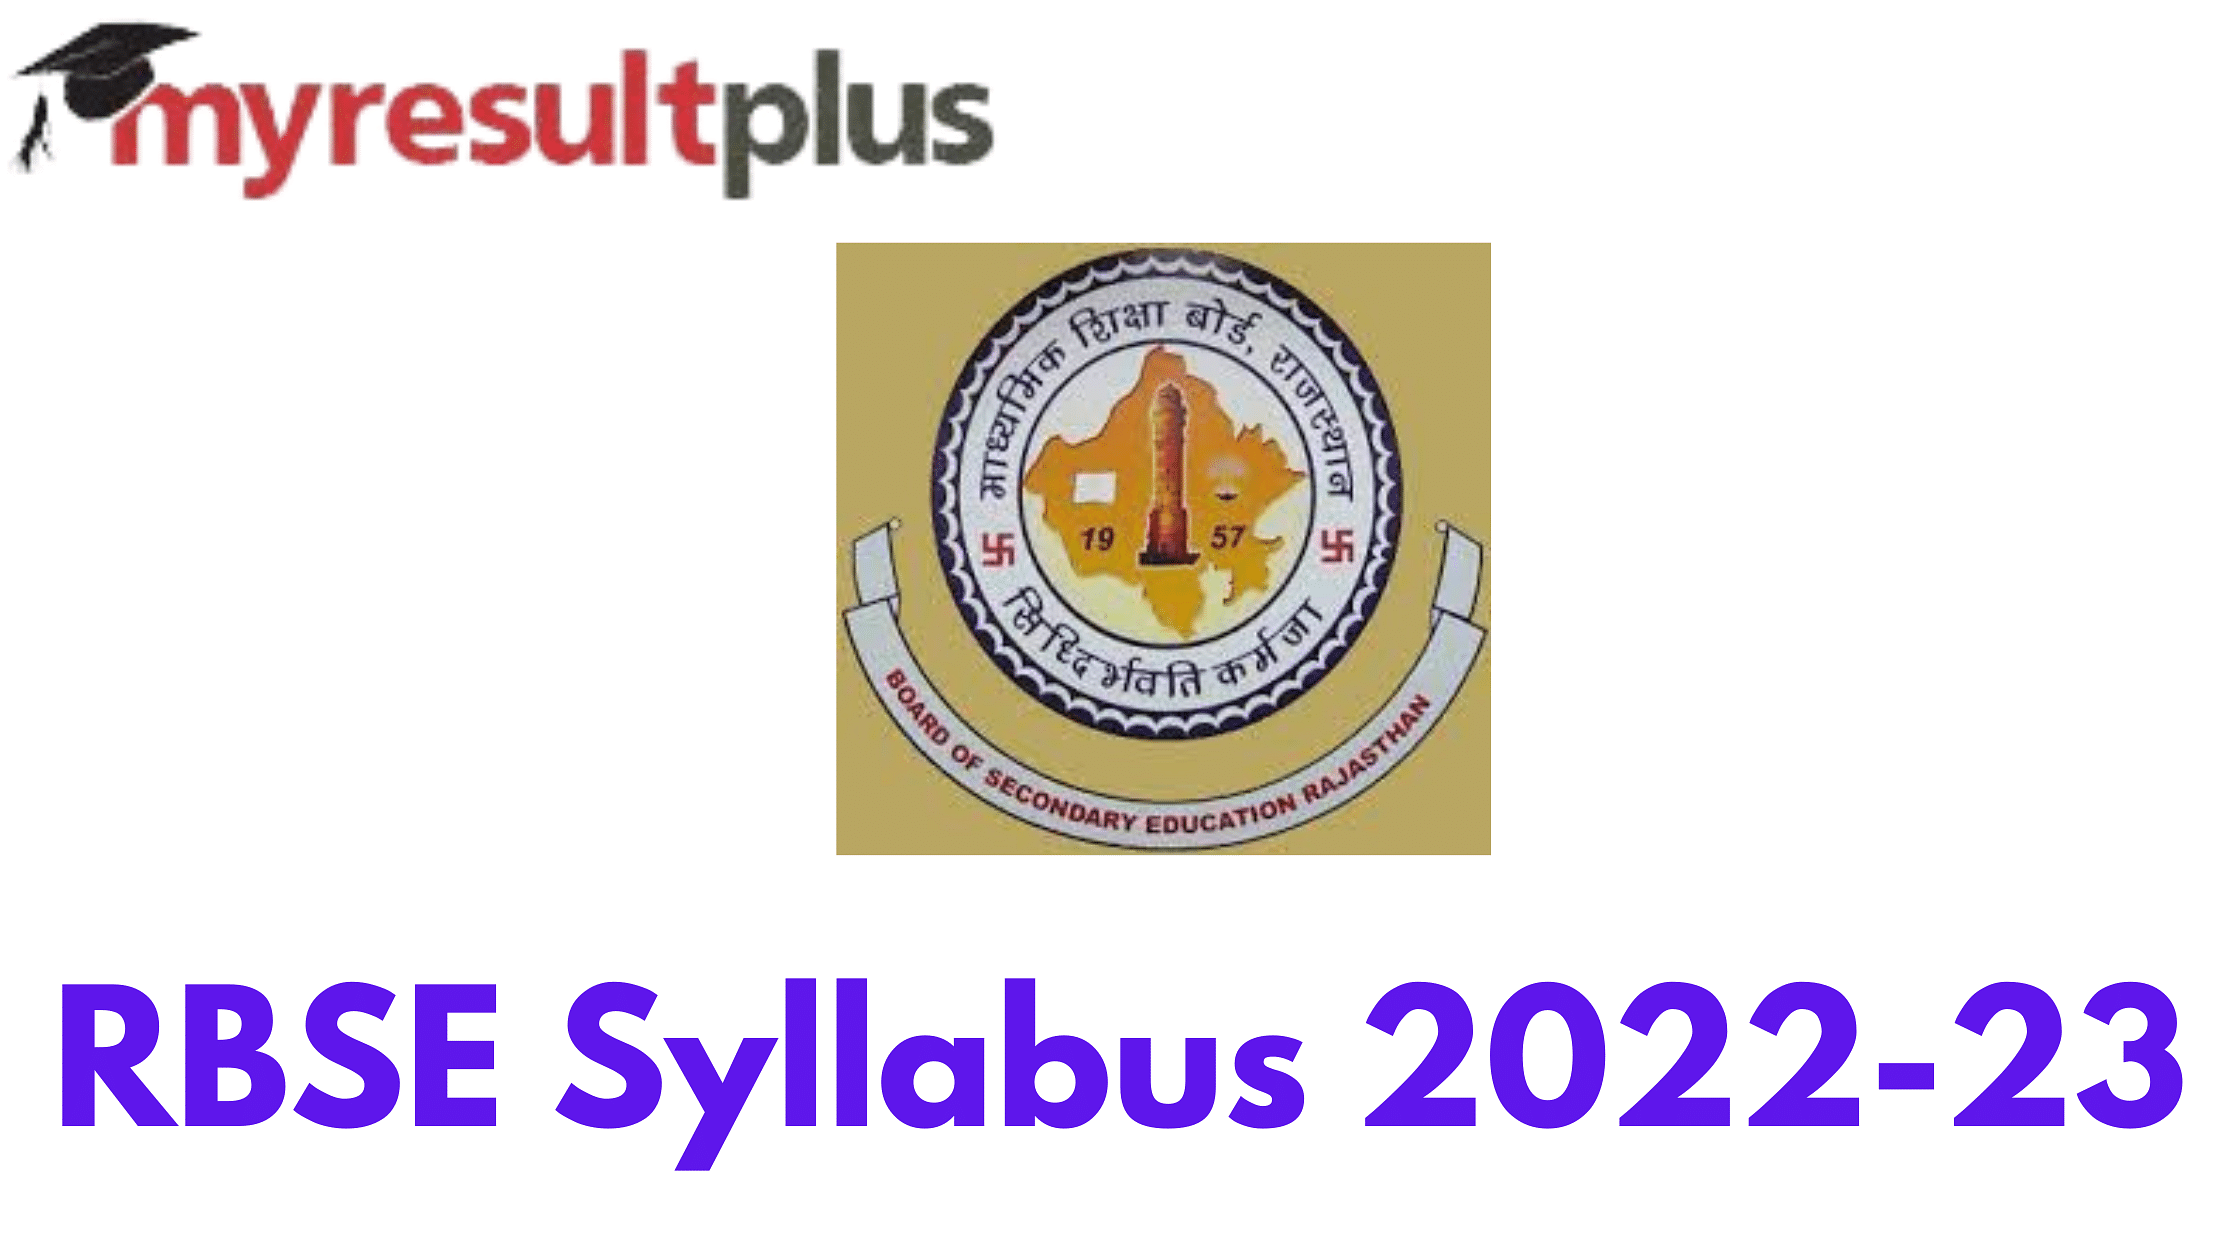 RBSE Syllabus 2022-23 Out For Class 10 and 12, Direct Link to Check Here